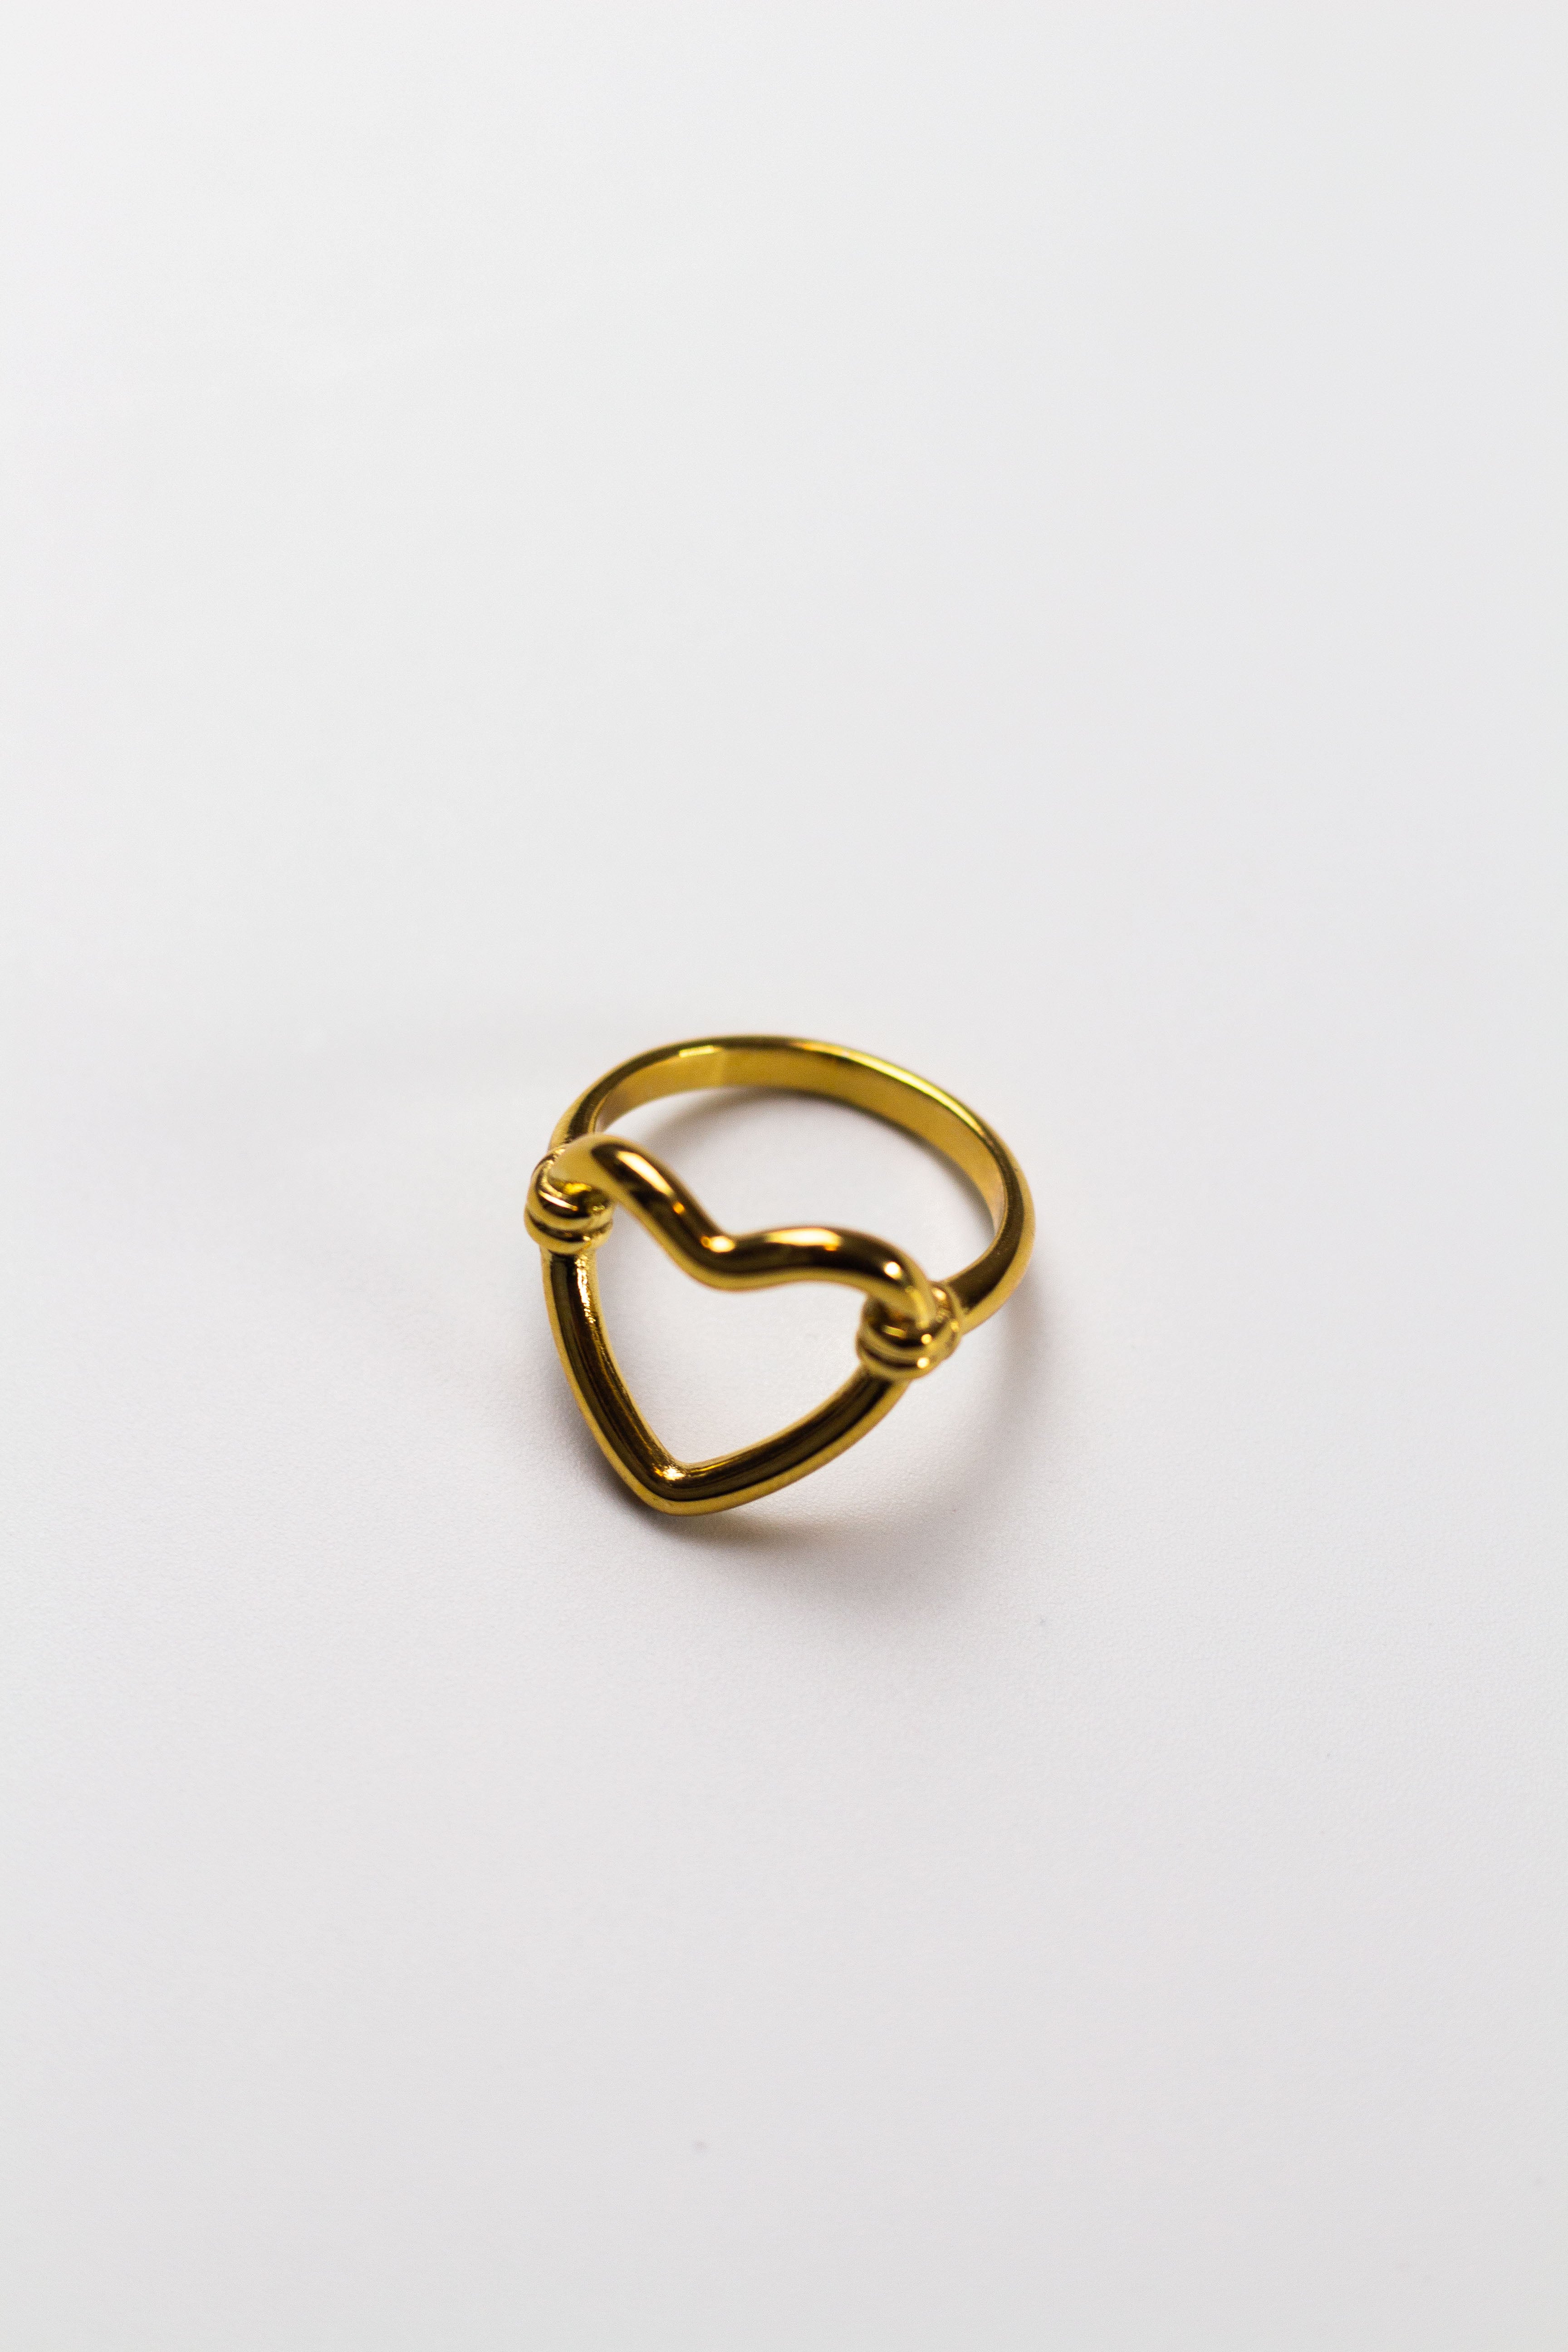 18k gold heart shaped ring. Ella's Element Hollow Heart Out Ring by E's Element.